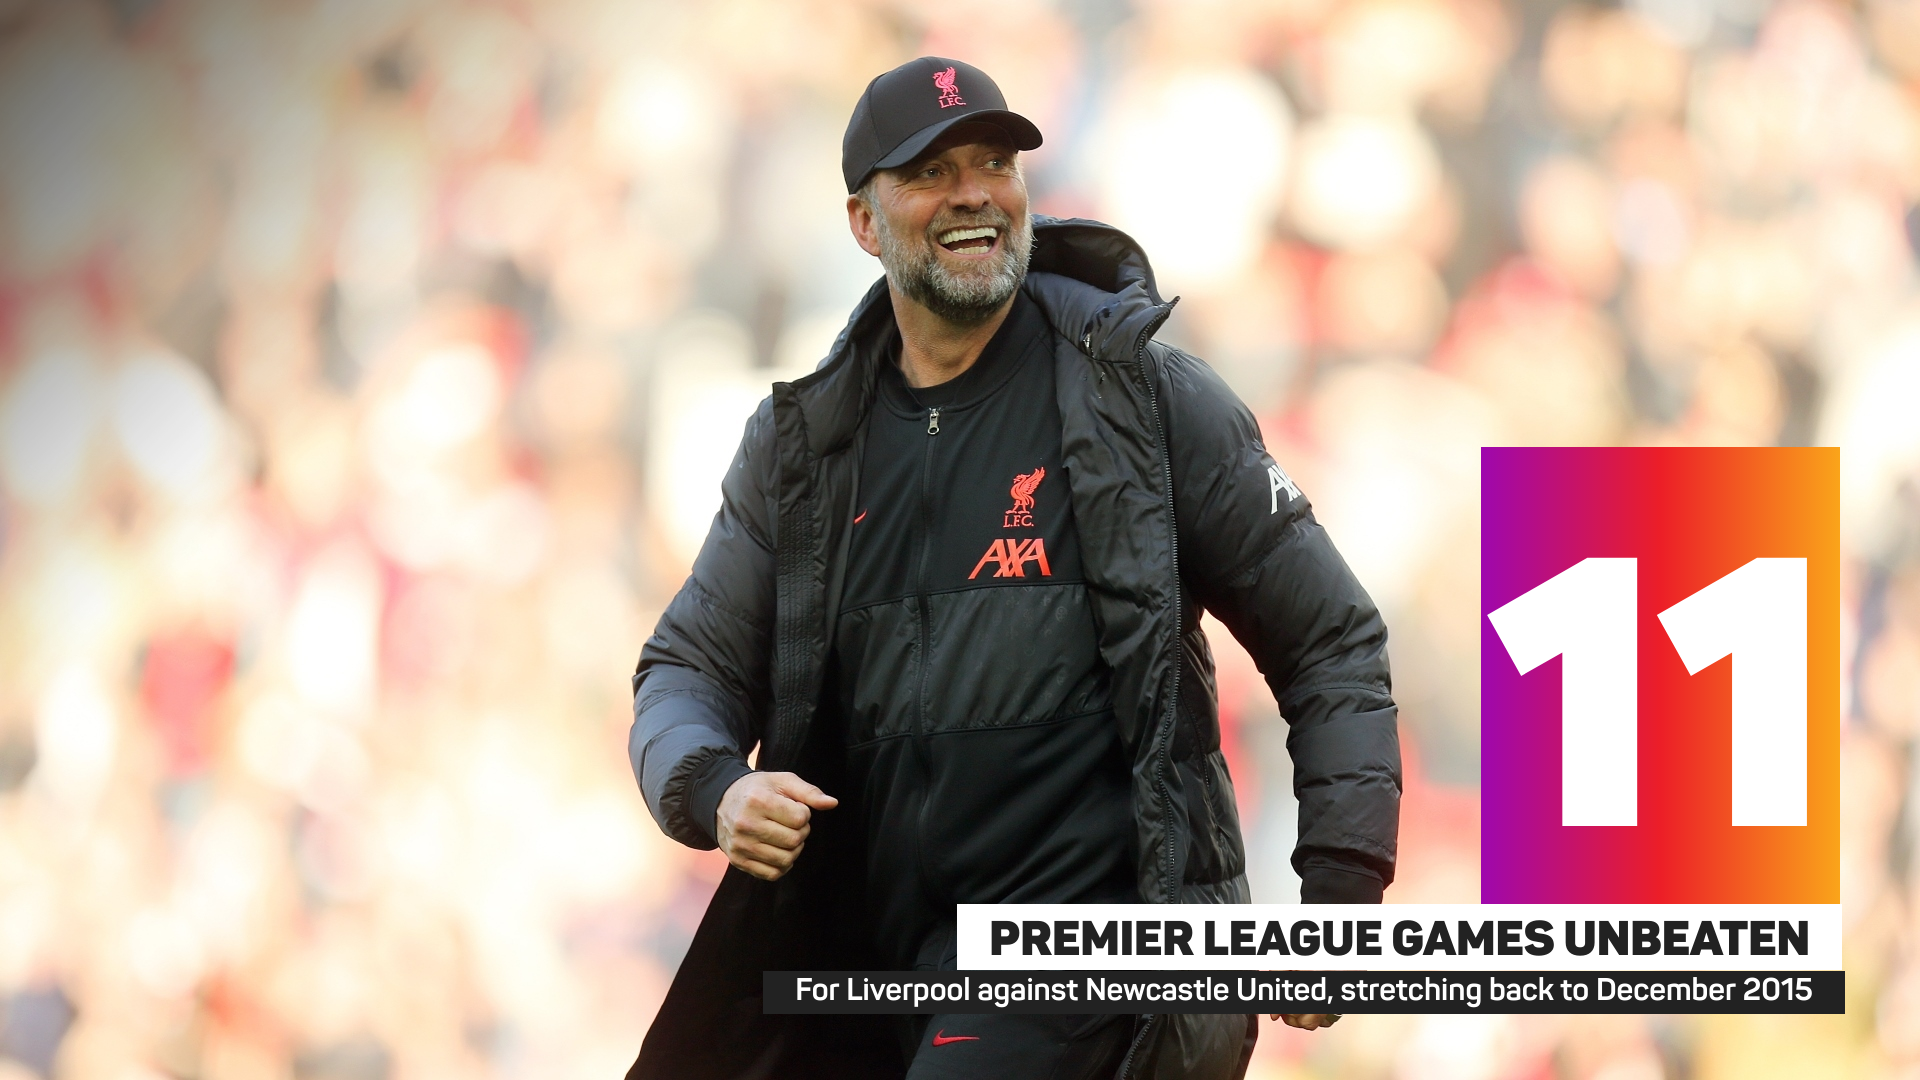 Liverpool are unbeaten in 11 league games against Newcastle